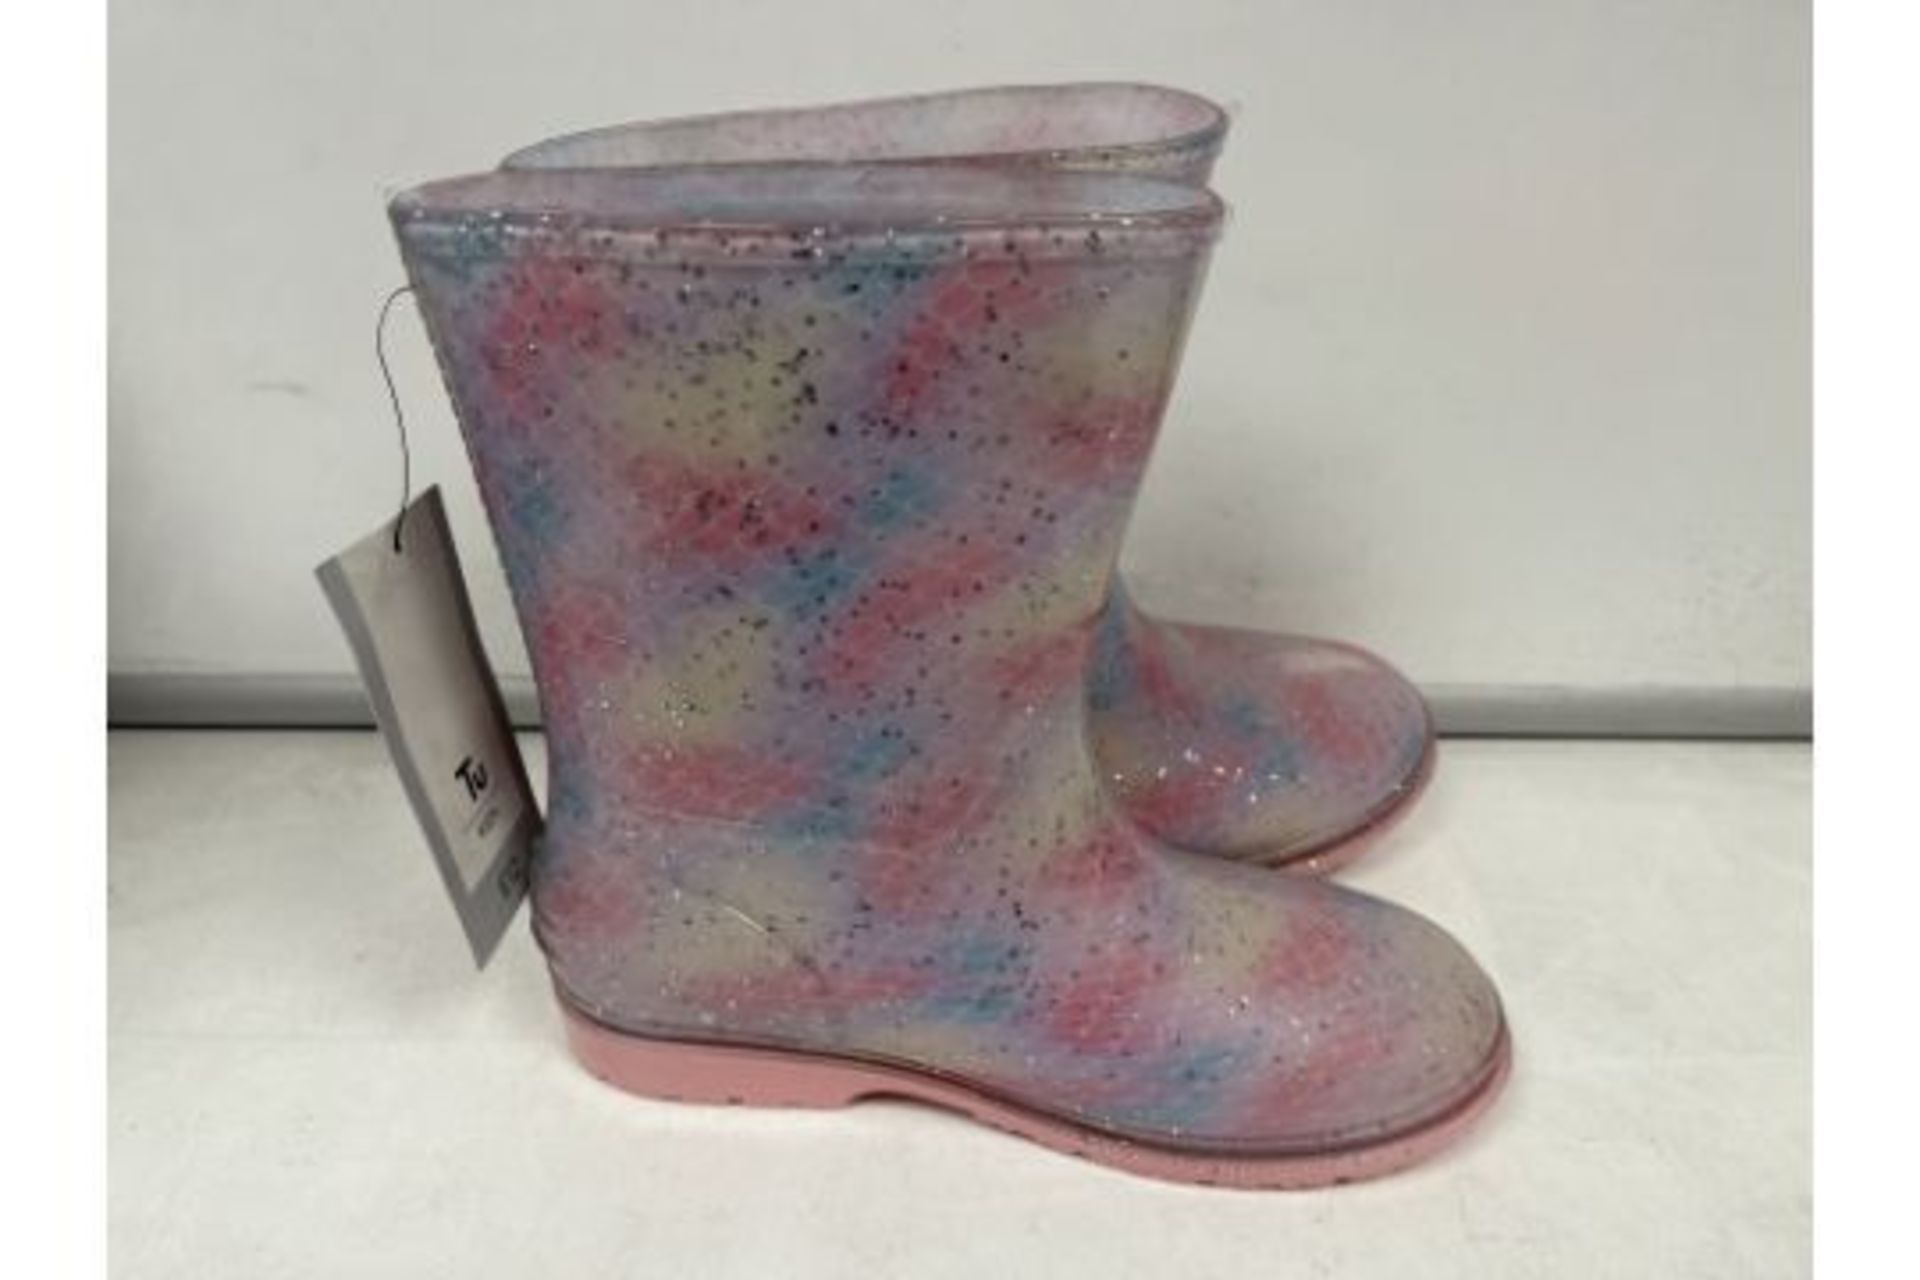 12 X NEW PACKAGED PAIRS OF TU KIDS CHILDRENS GLITTERY WELLIES IN A RATIO PACKED BOX WITH VARIOUS